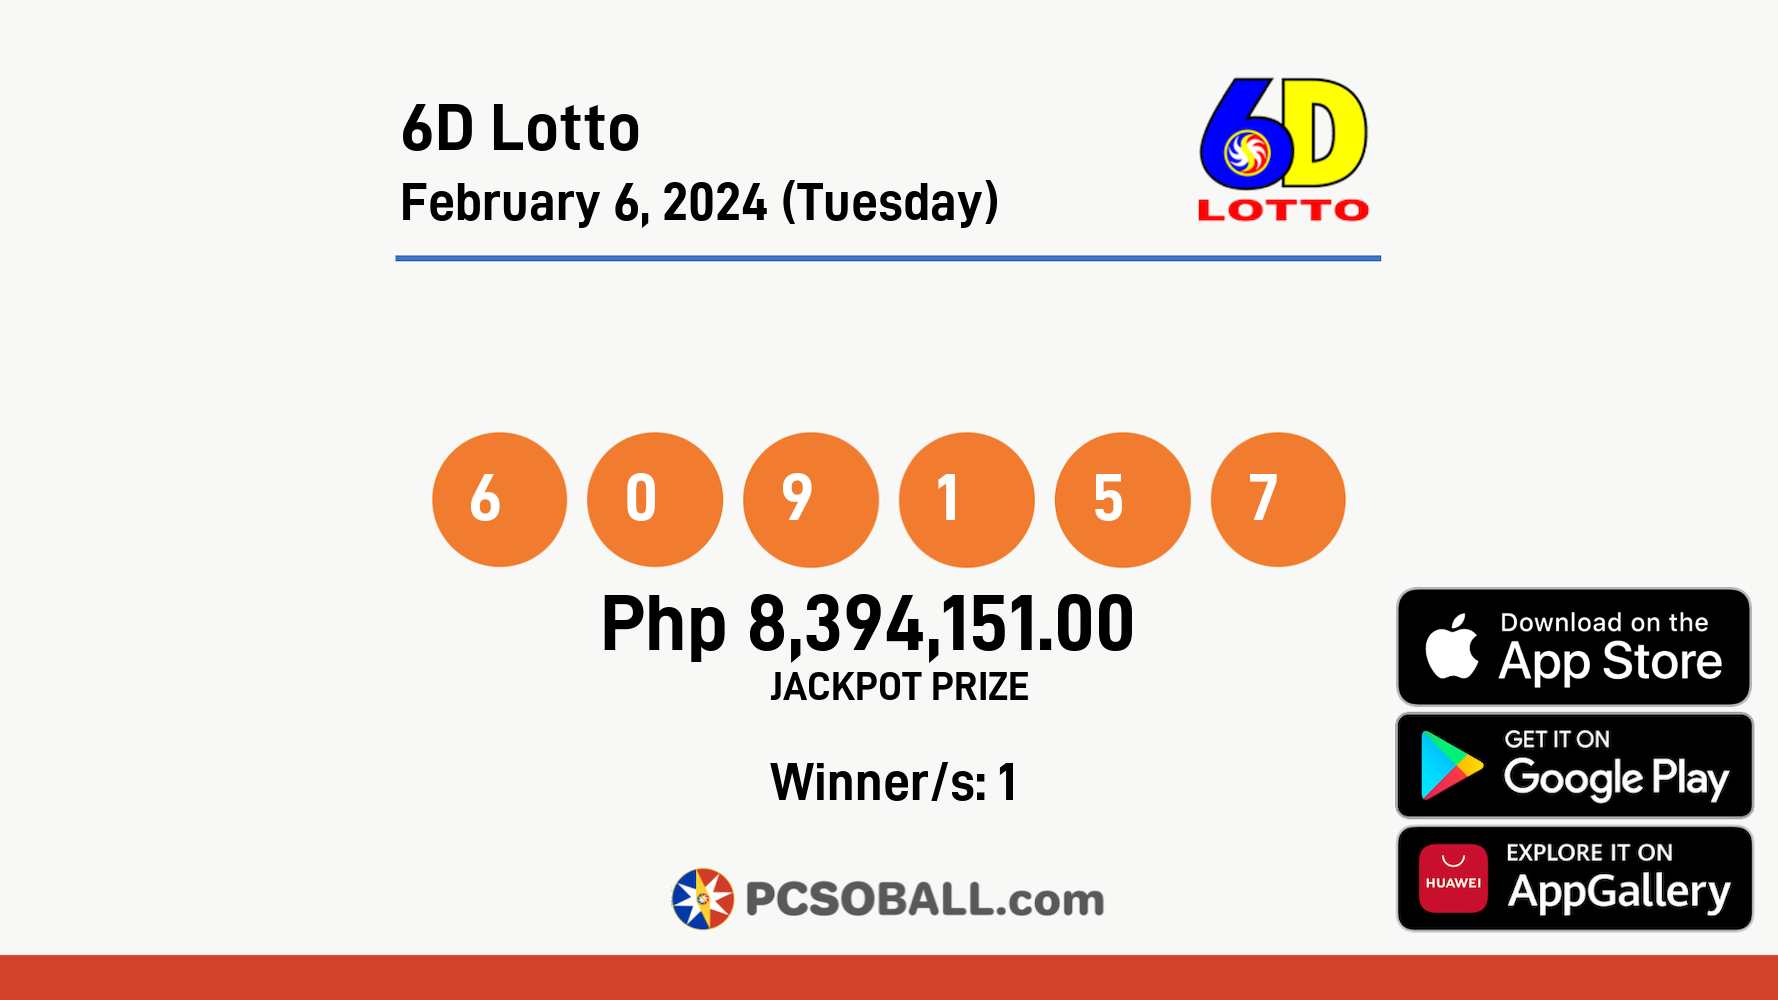 6D Lotto February 6, 2024 (Tuesday) Result